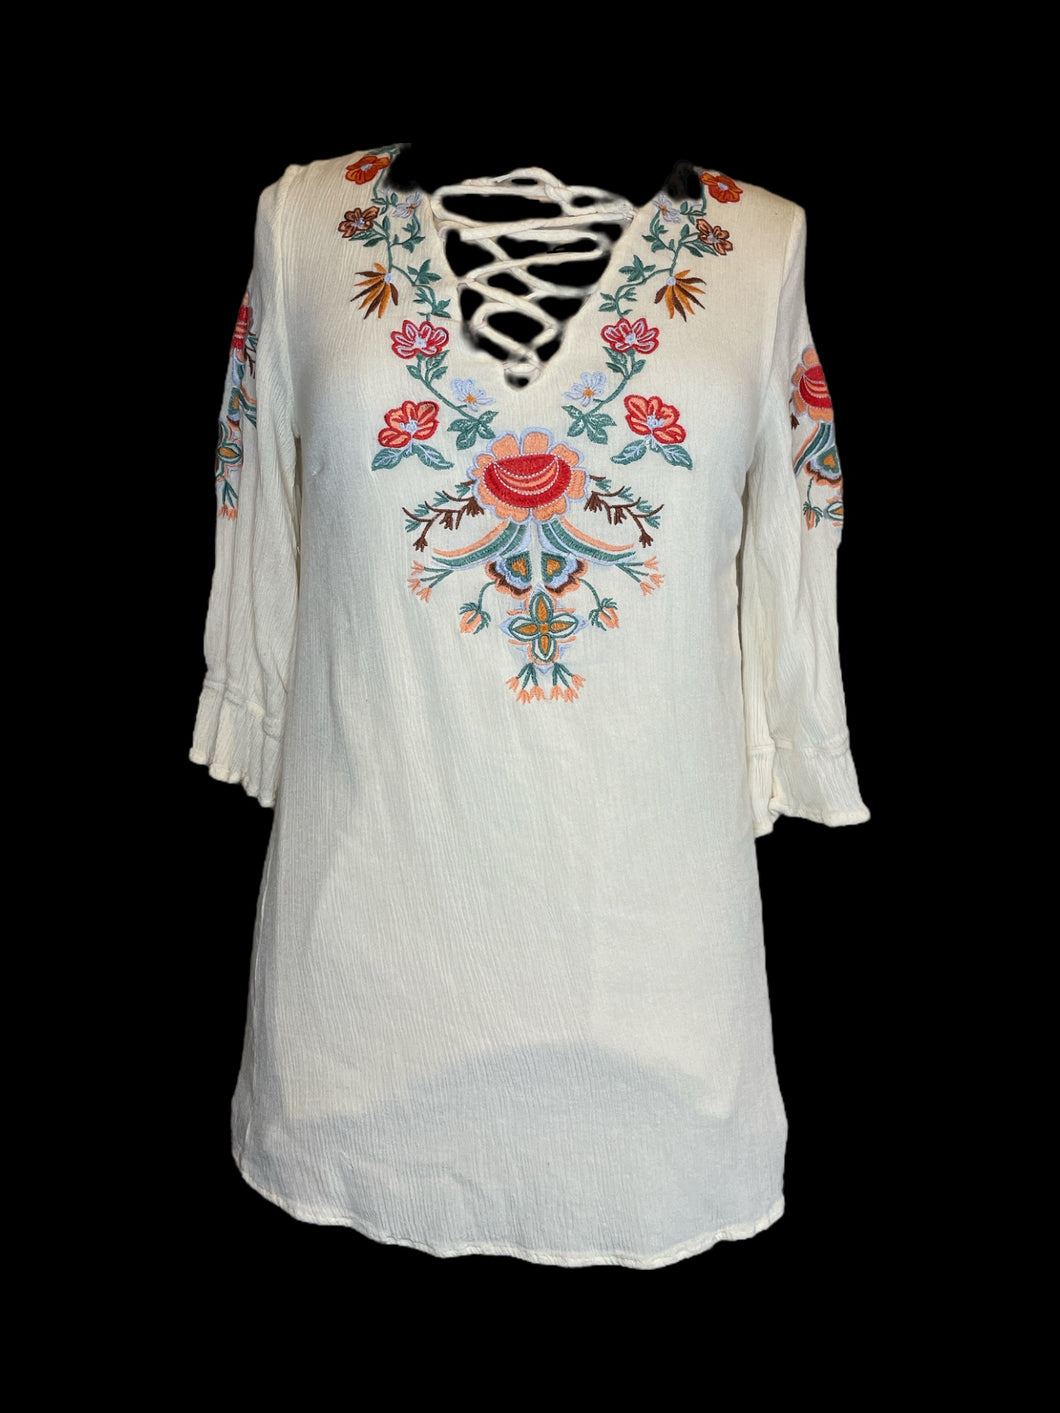 S Off-white half sleeve lace up neckline top w/ multicolor floral embroidery, & ruffle cuffs